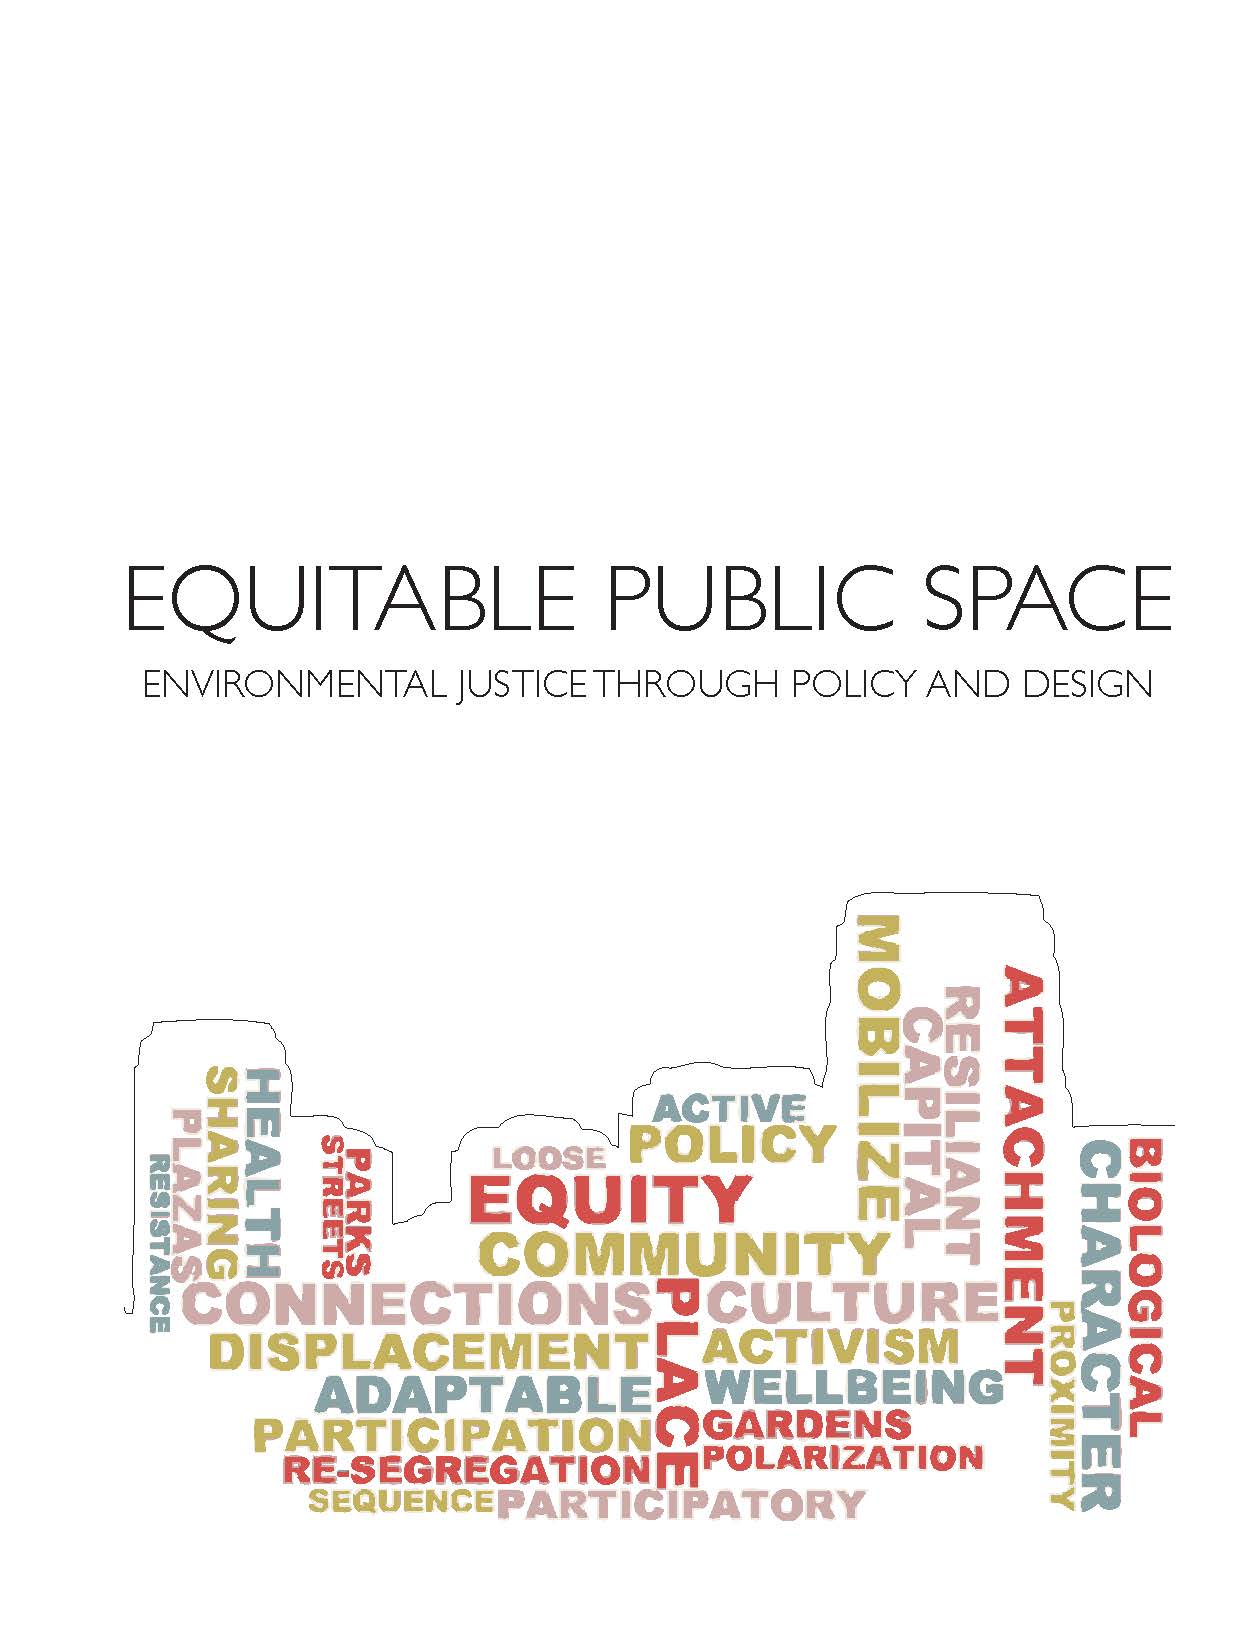 Equitable Public Space, Environmental Justice Through Policy and Design